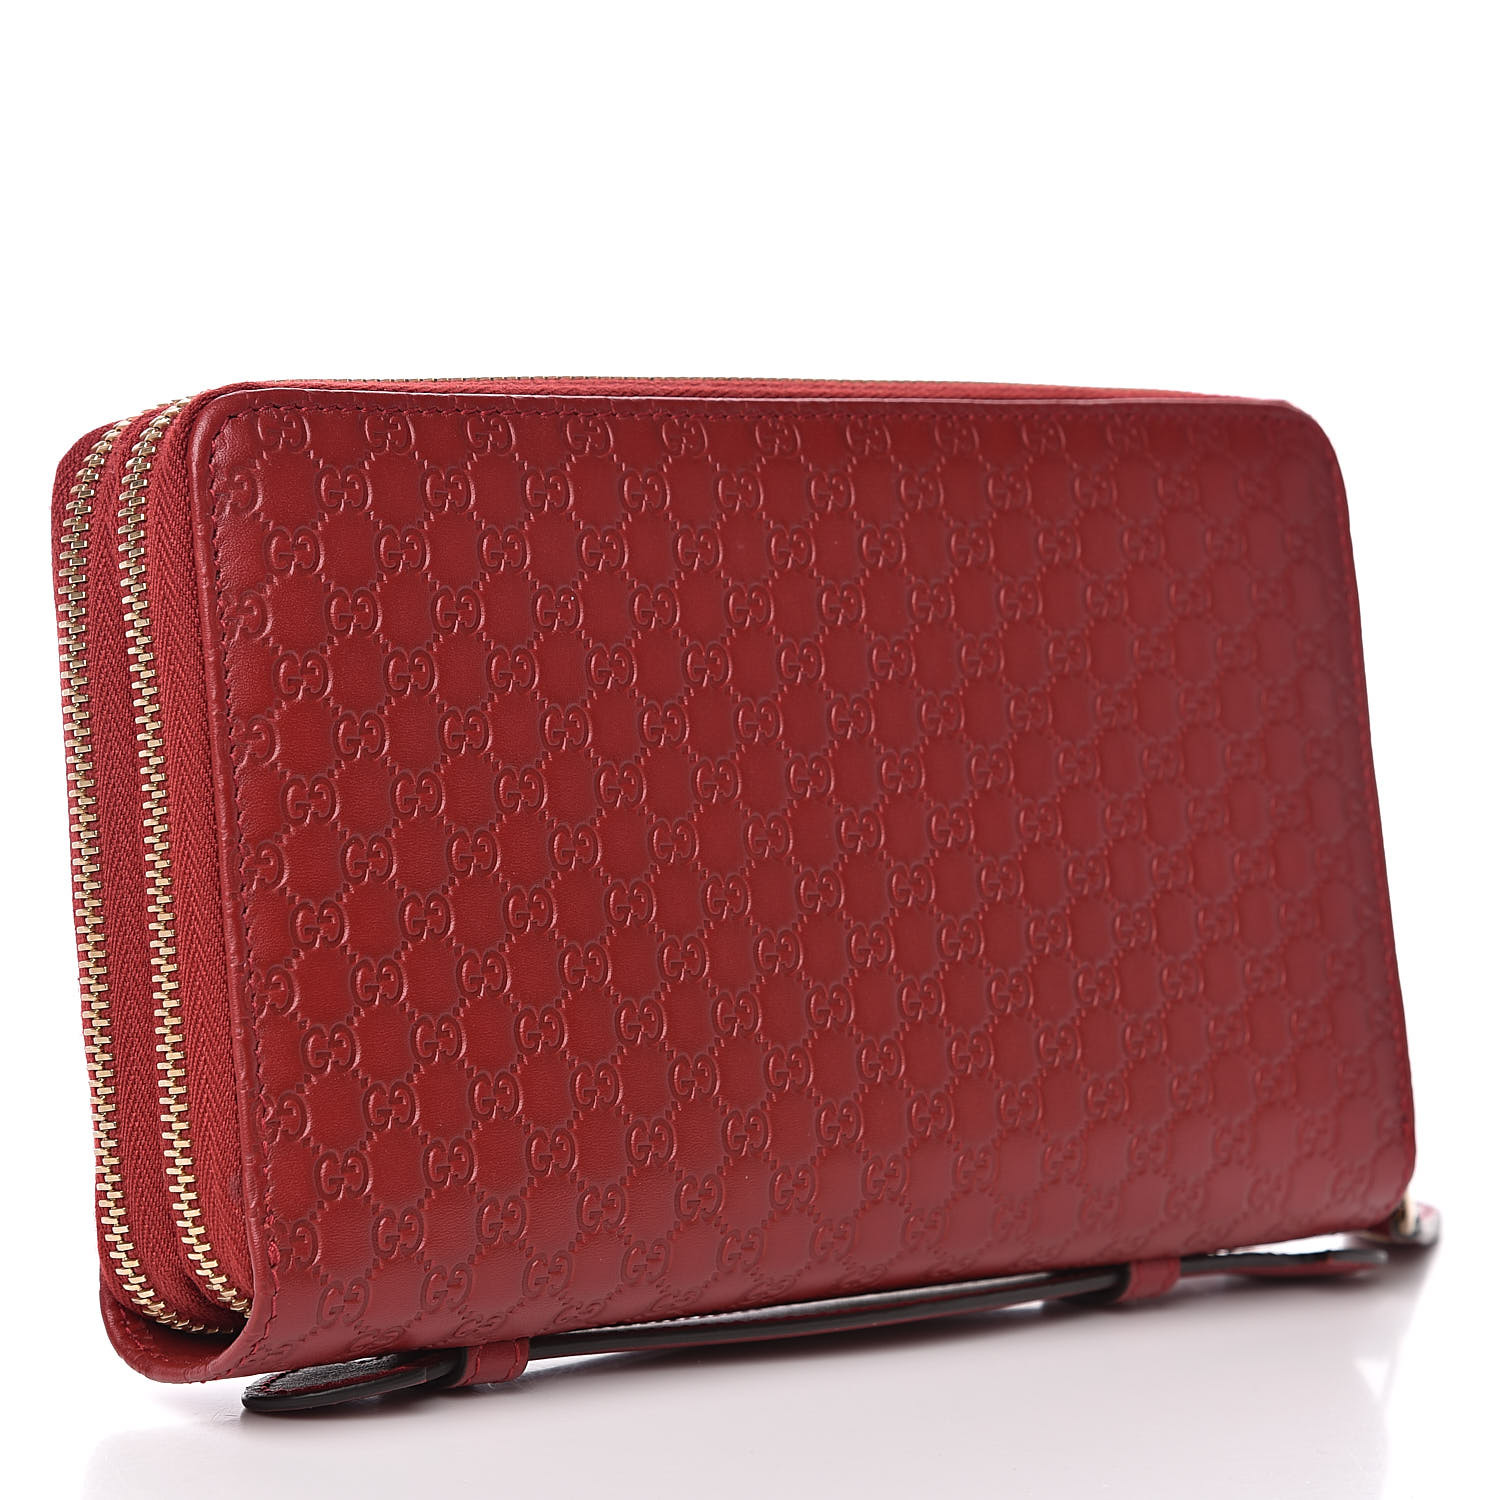 GUCCI Microguccissima Zip Around Top Handle Travel Wallet Red 519712